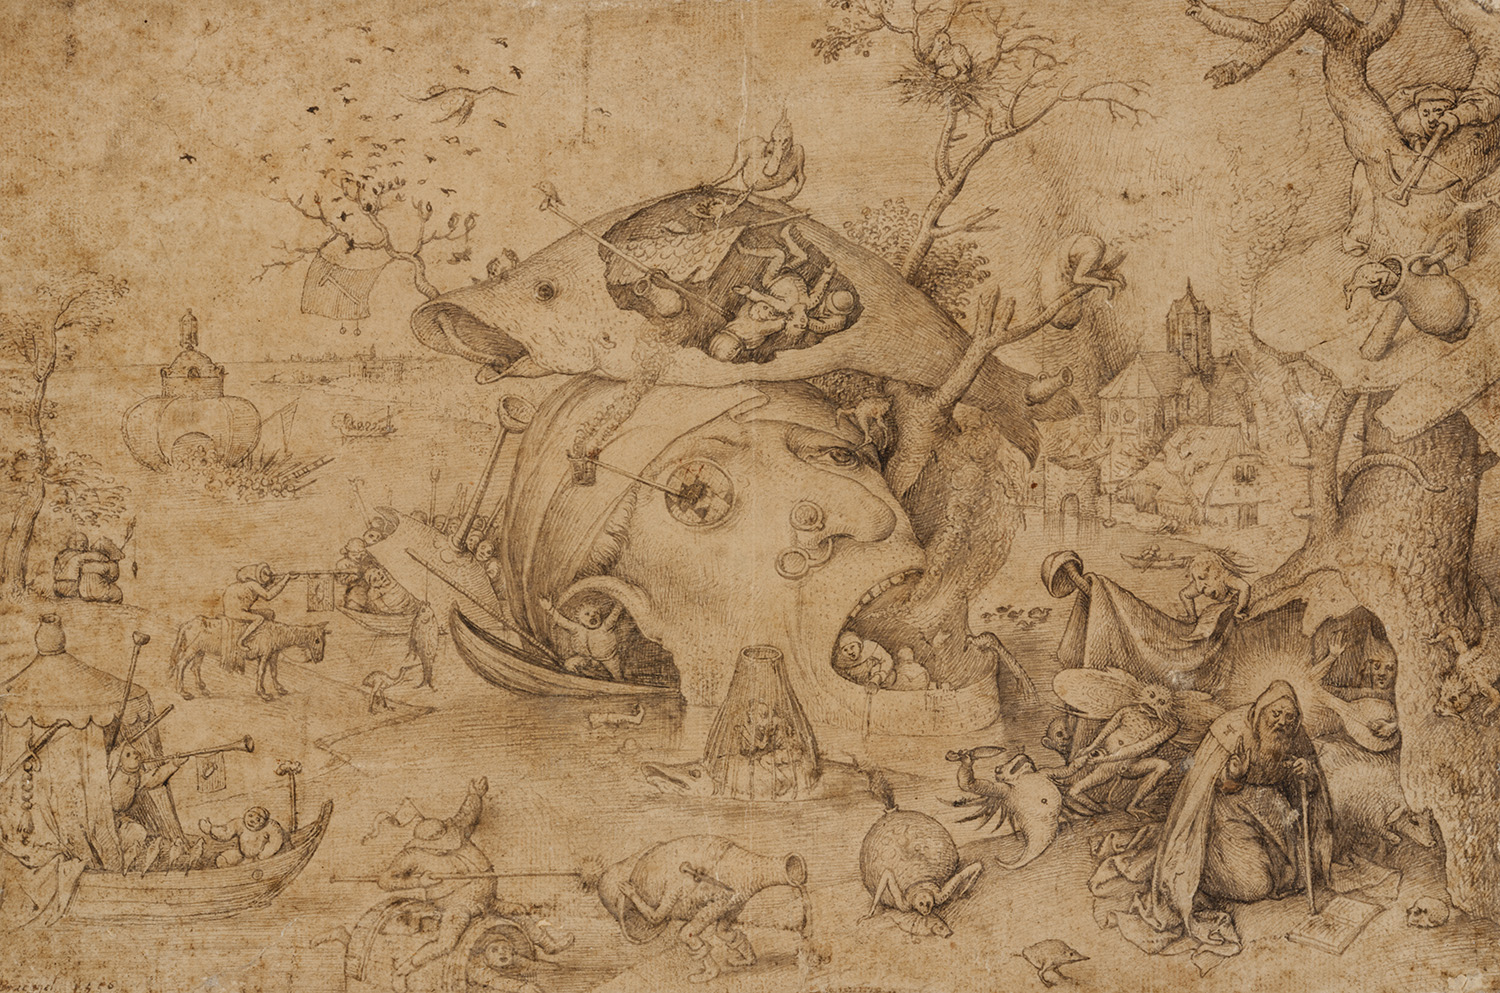 Bruegel's drawing of the Temptation of St Anthony